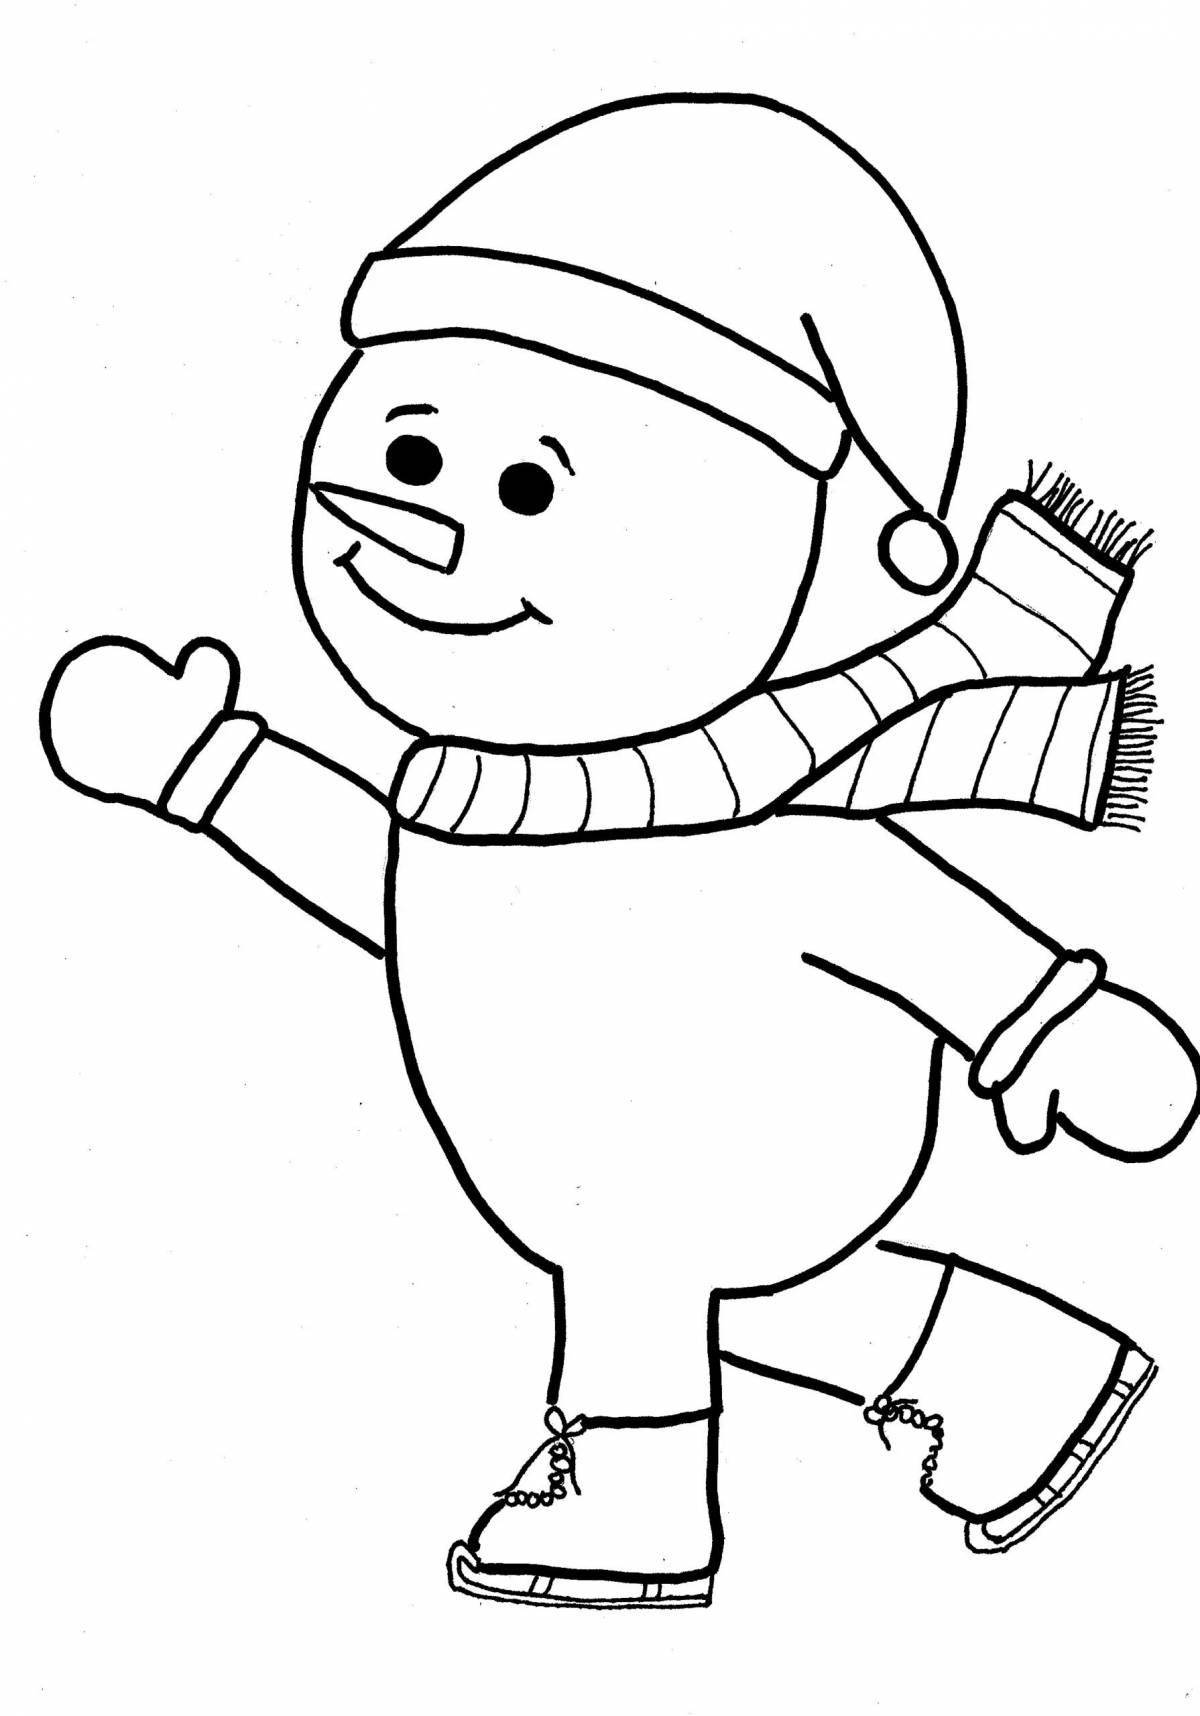 Animated snowman coloring book for kids 3 4